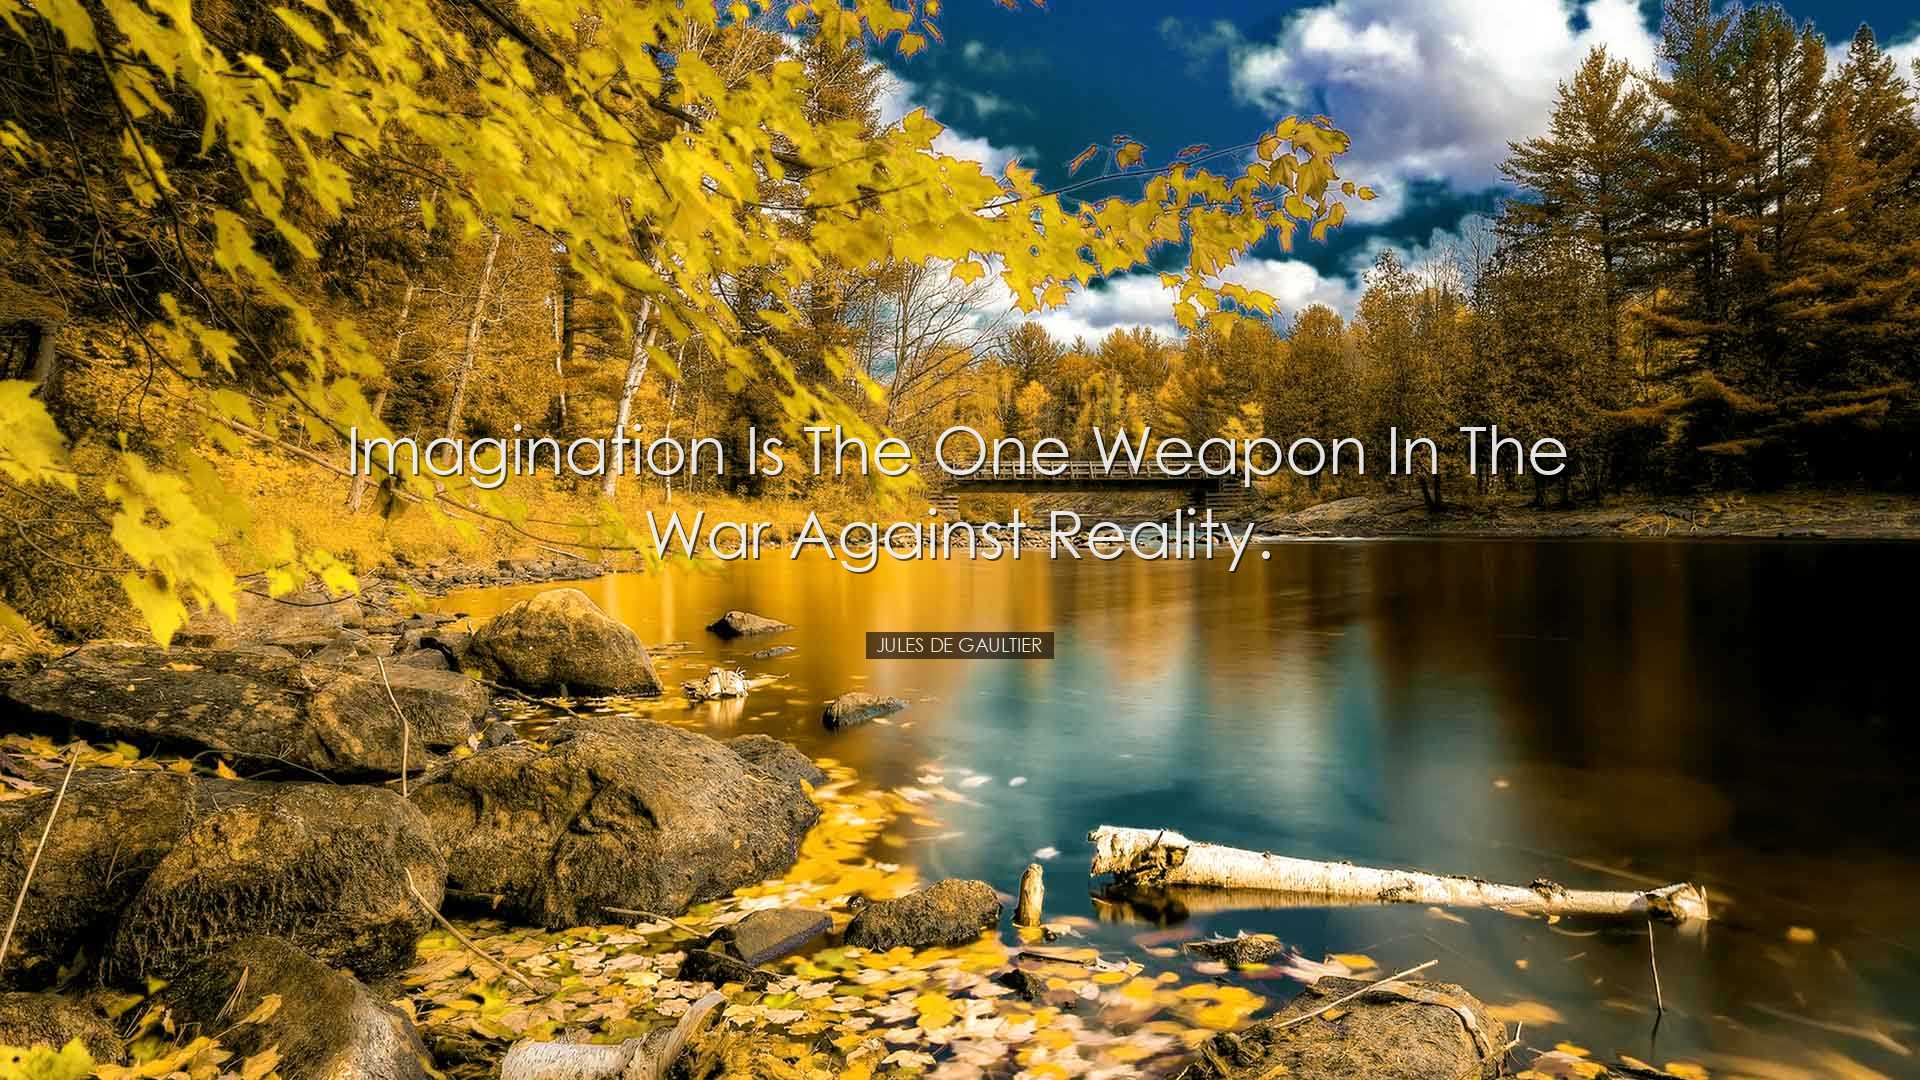 Imagination is the one weapon in the war against reality. - Jules